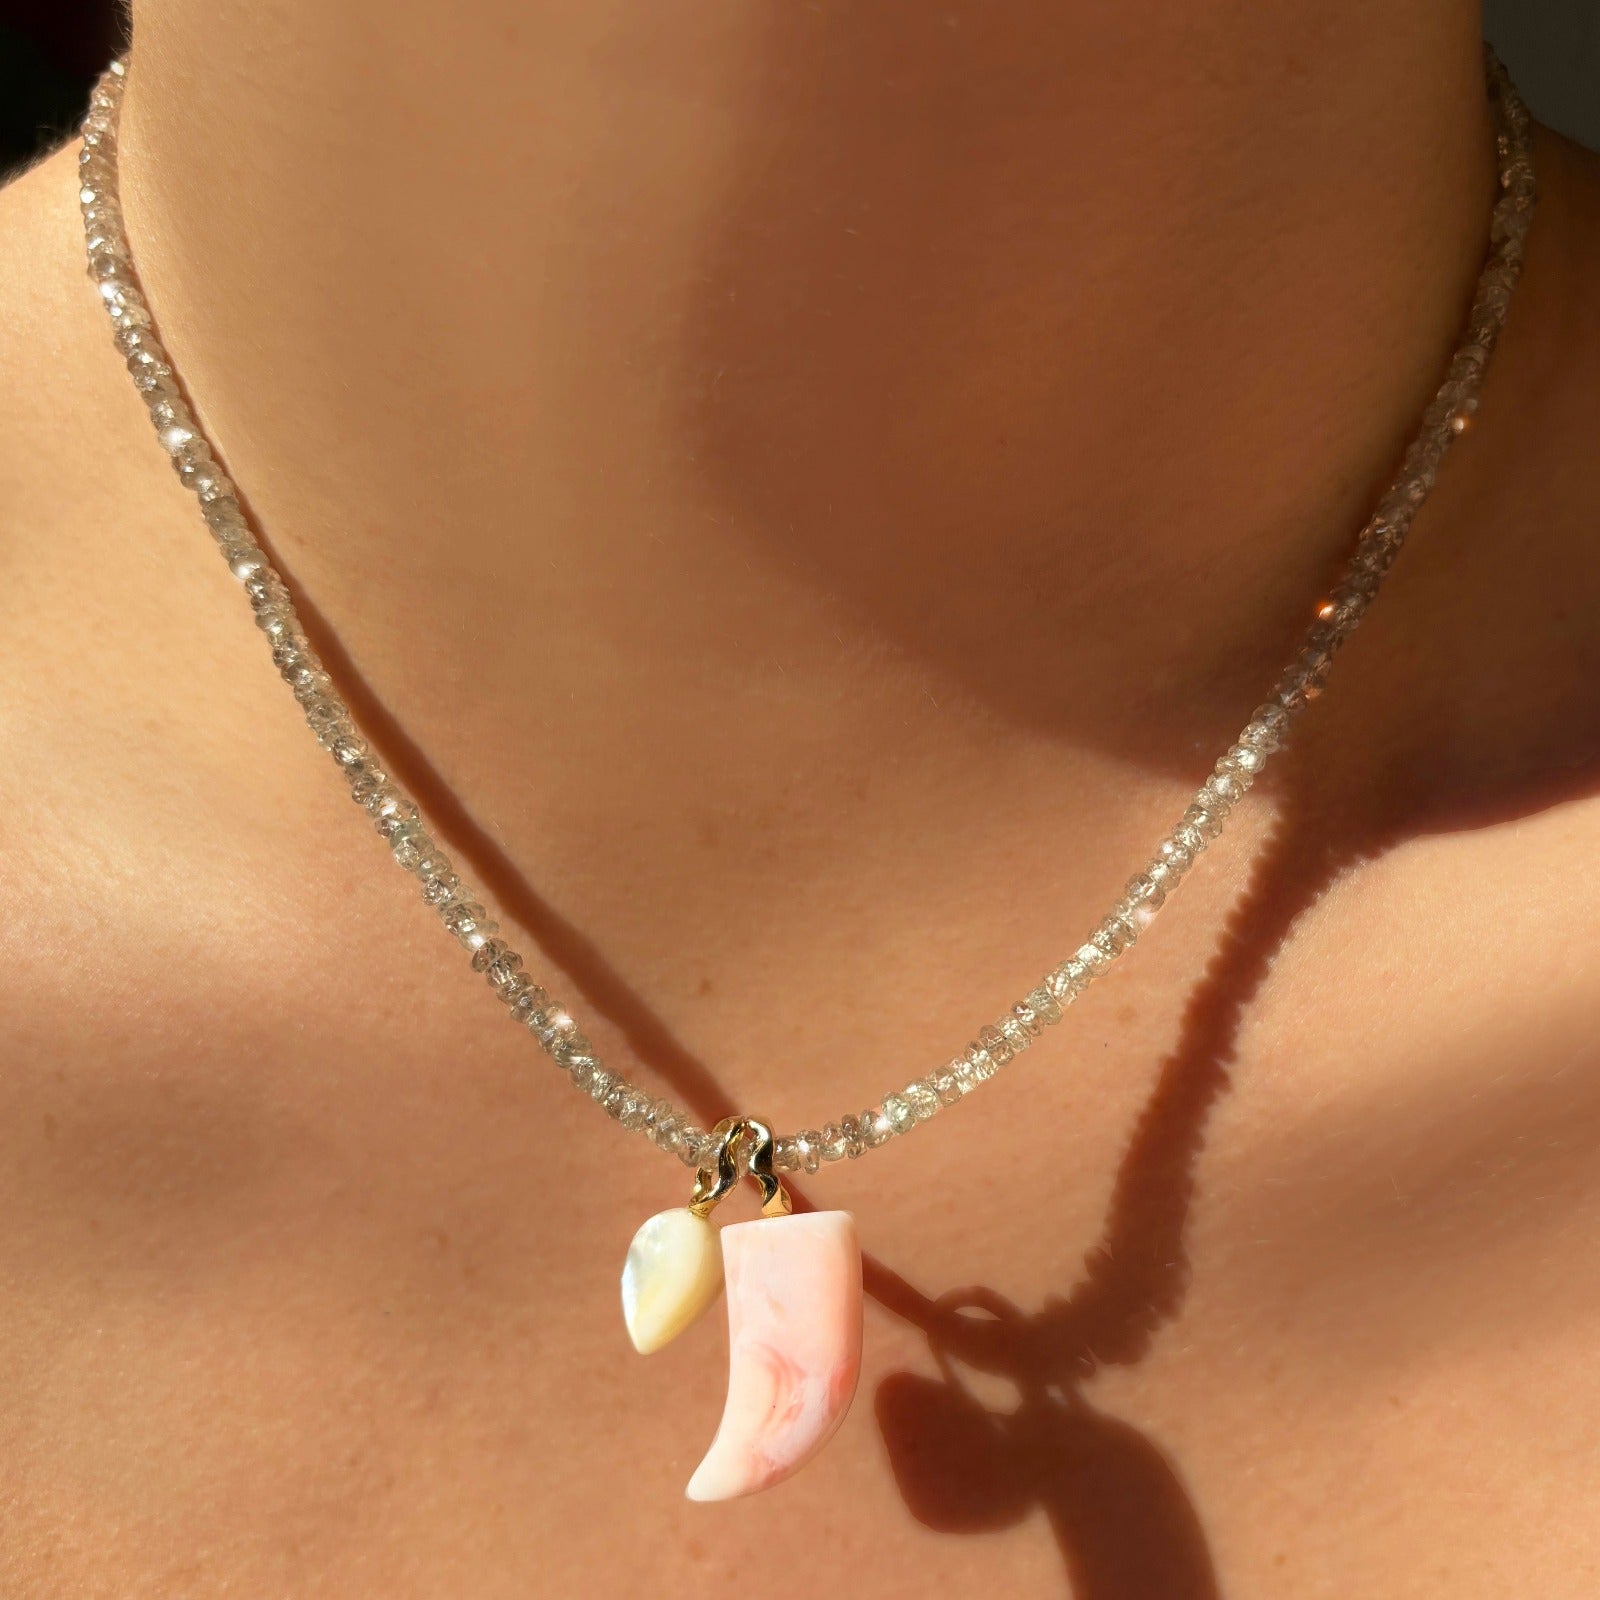 Pink opal horn charm. Styled on a neck with an acorn charm hanging from a beaded necklace.